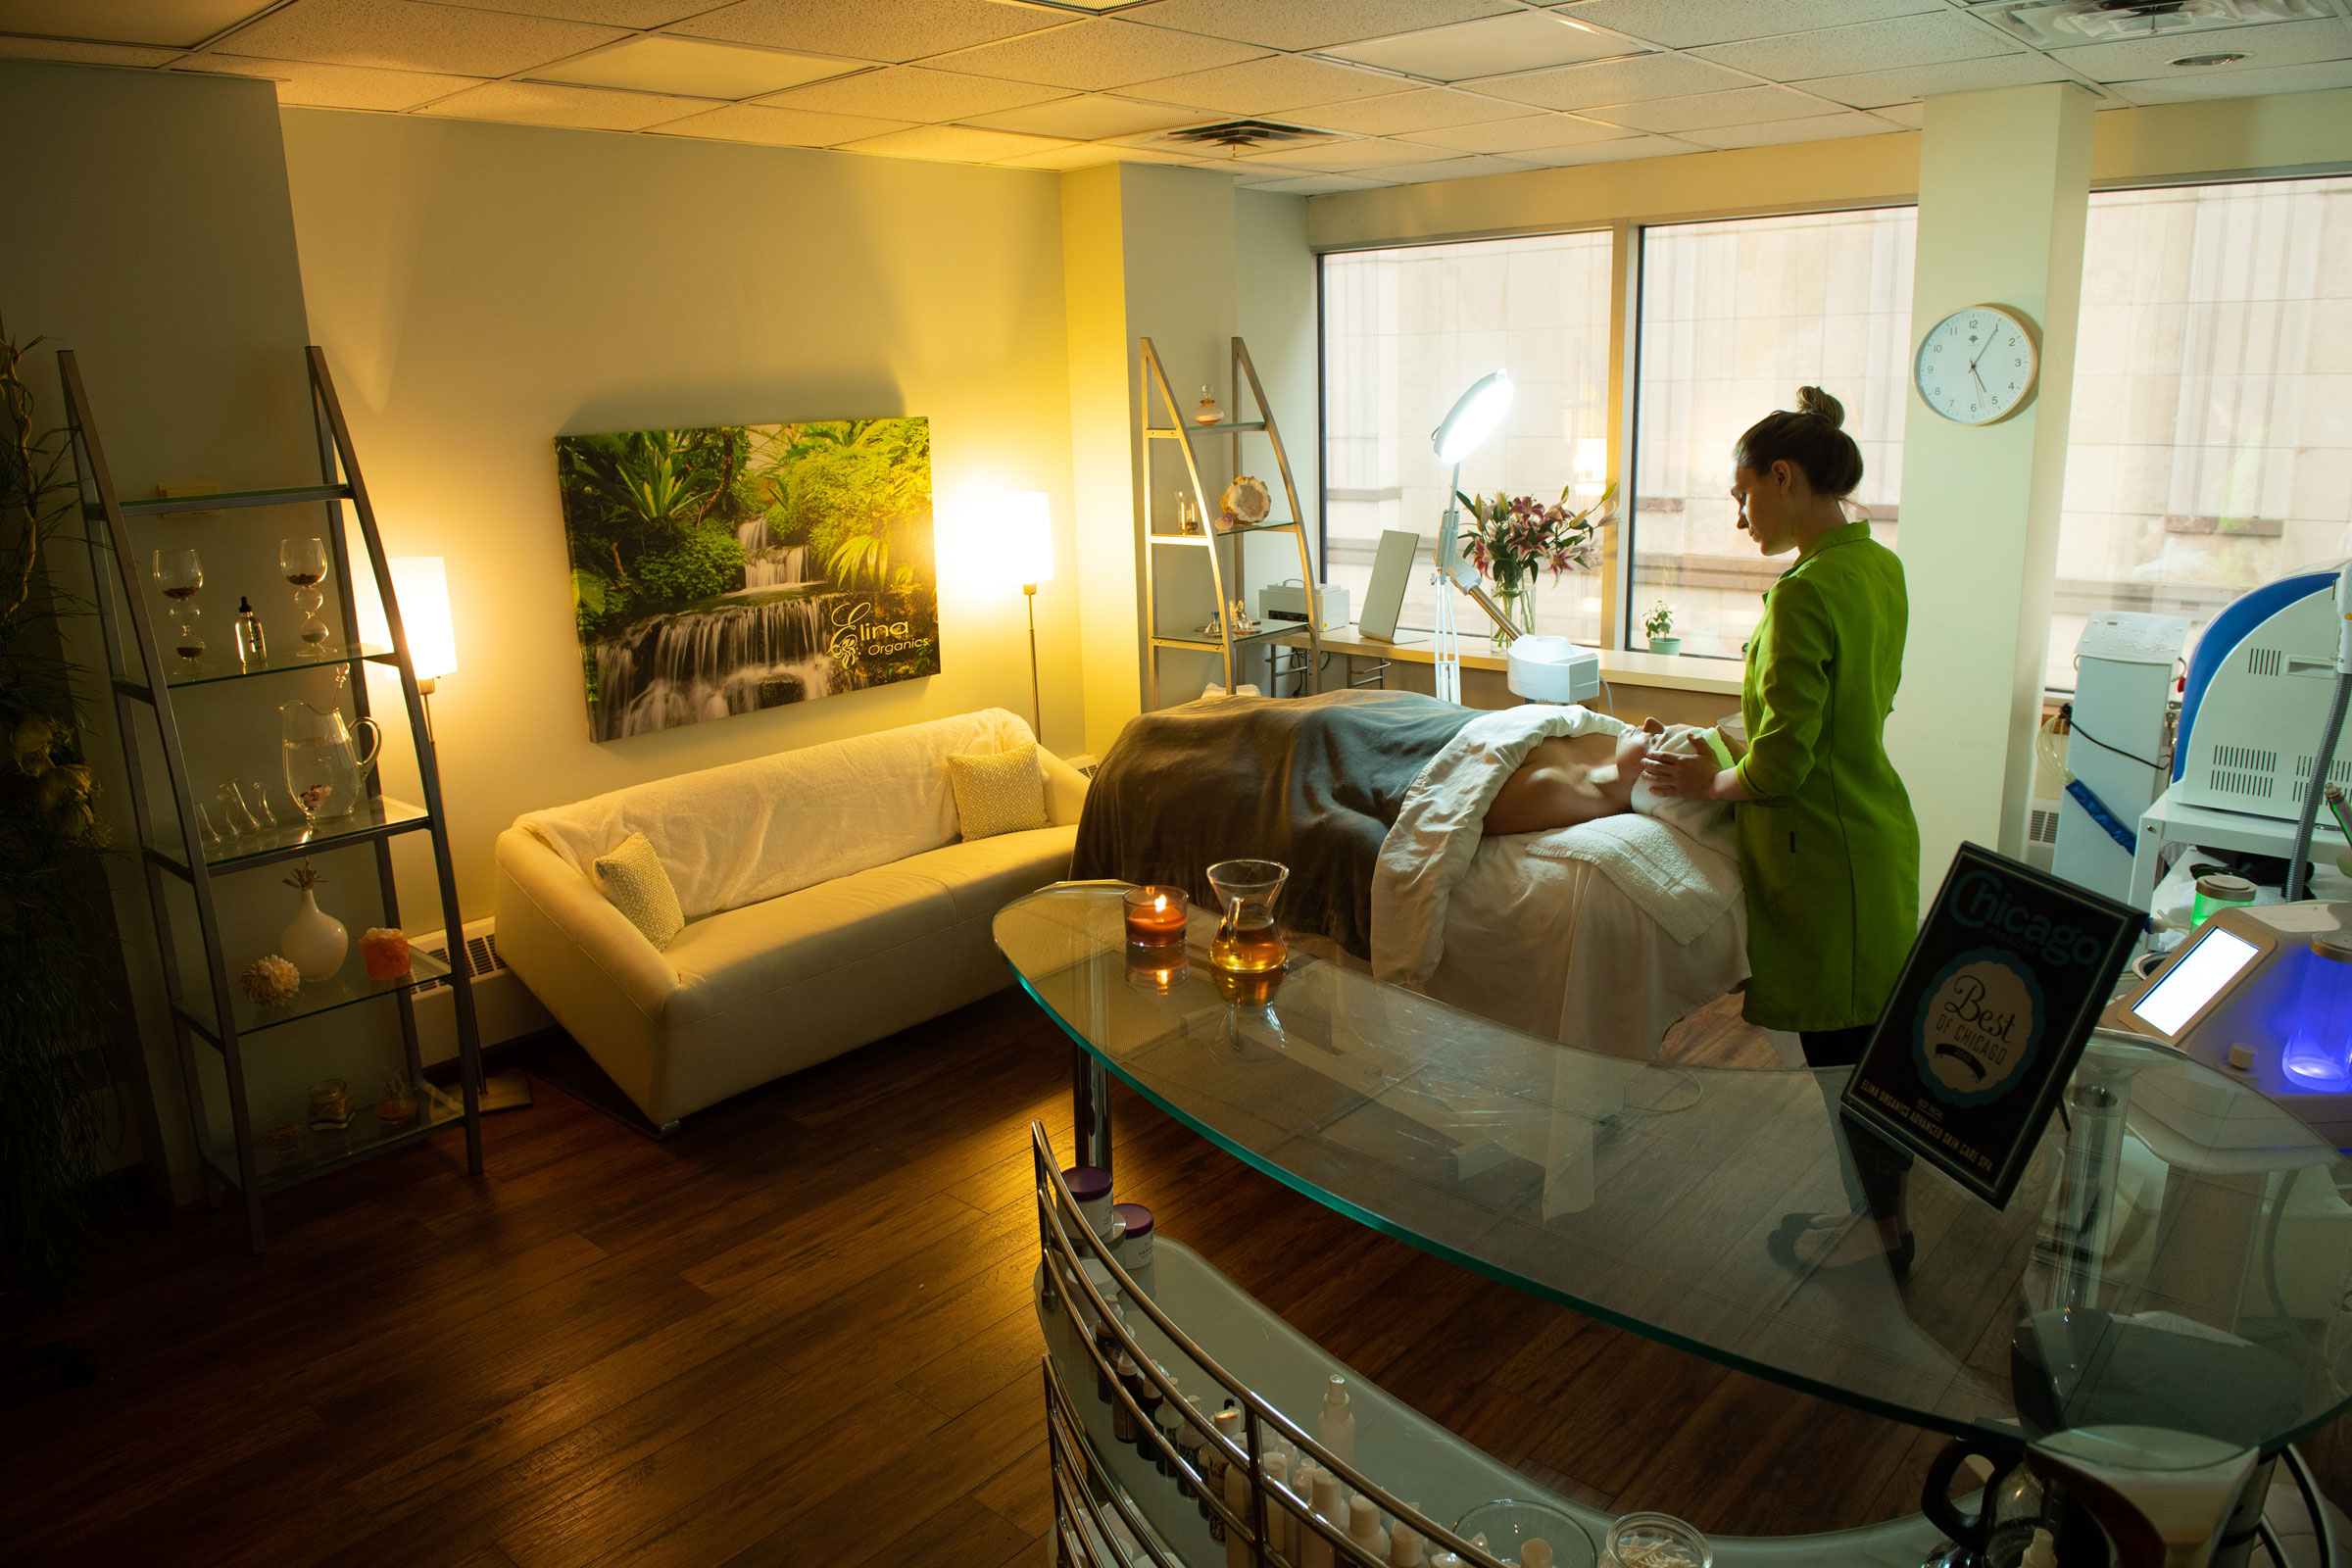 Branding-Photography-Elina-Organic-Spa-Treatment-Room-Overview-During-Session-Dan-Merlo-Photogarphy